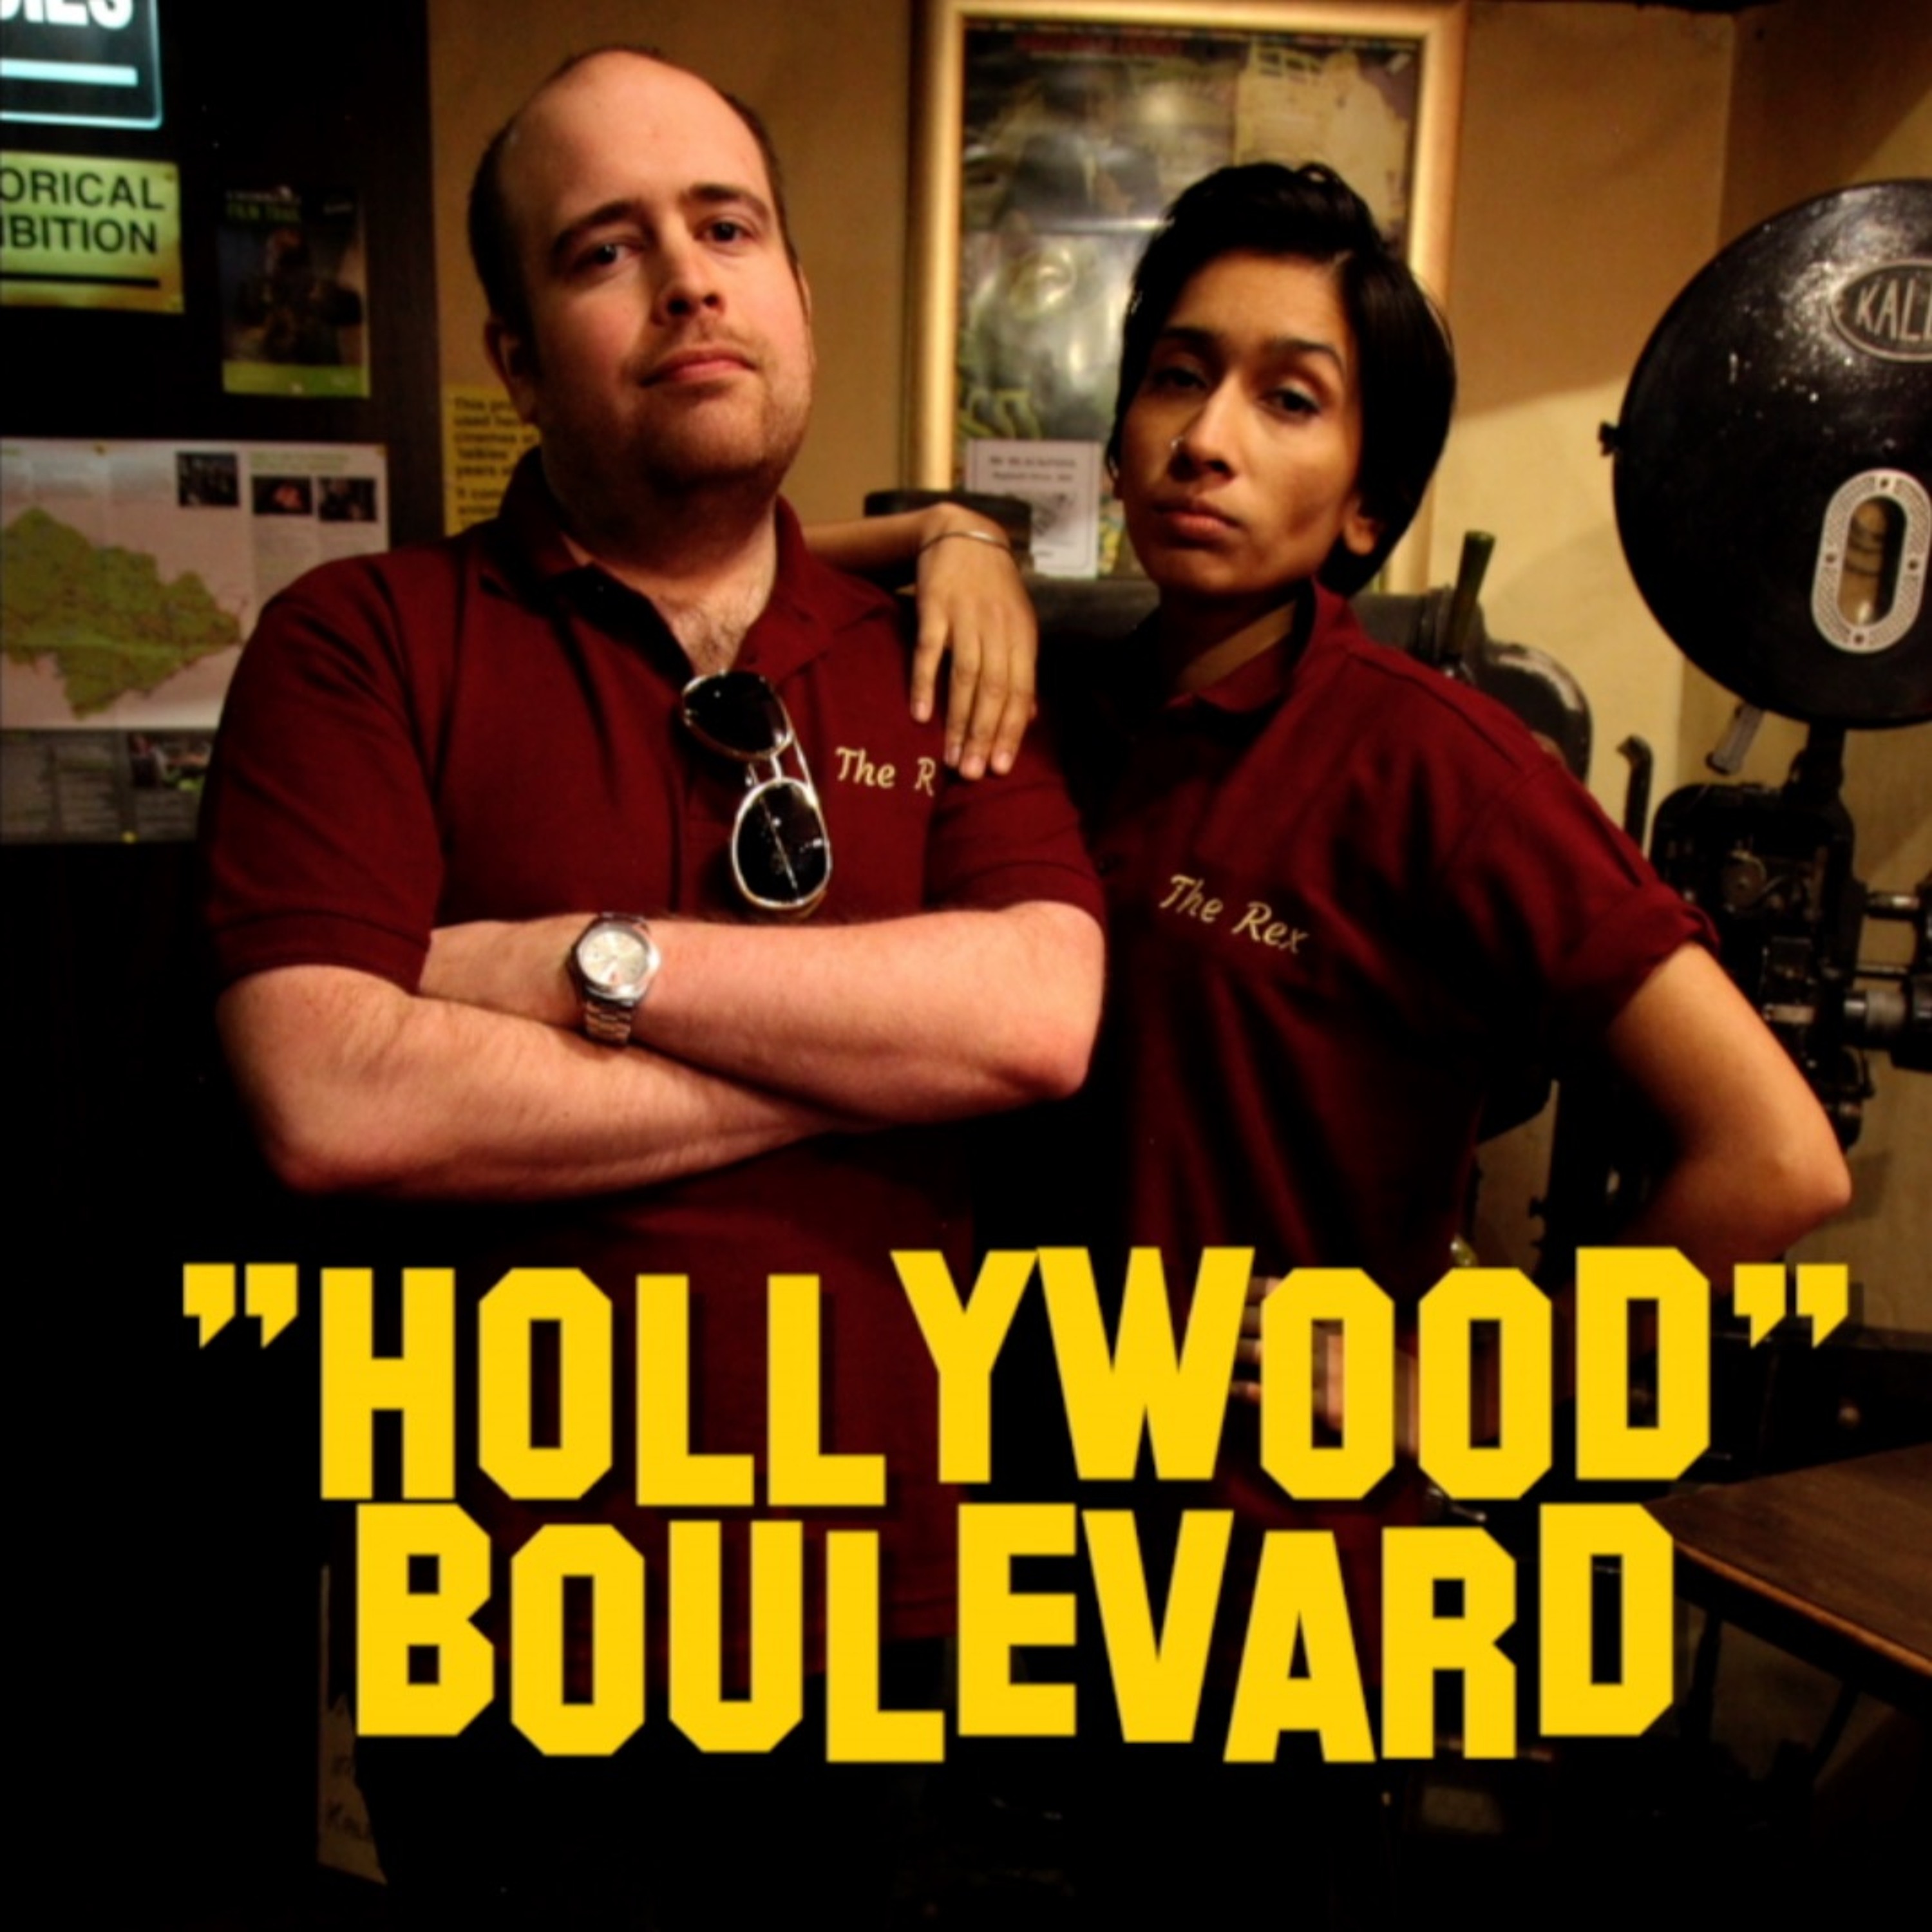 The Making of ”Hollywood Boulevard” - Episode 4: The Cast Chime In